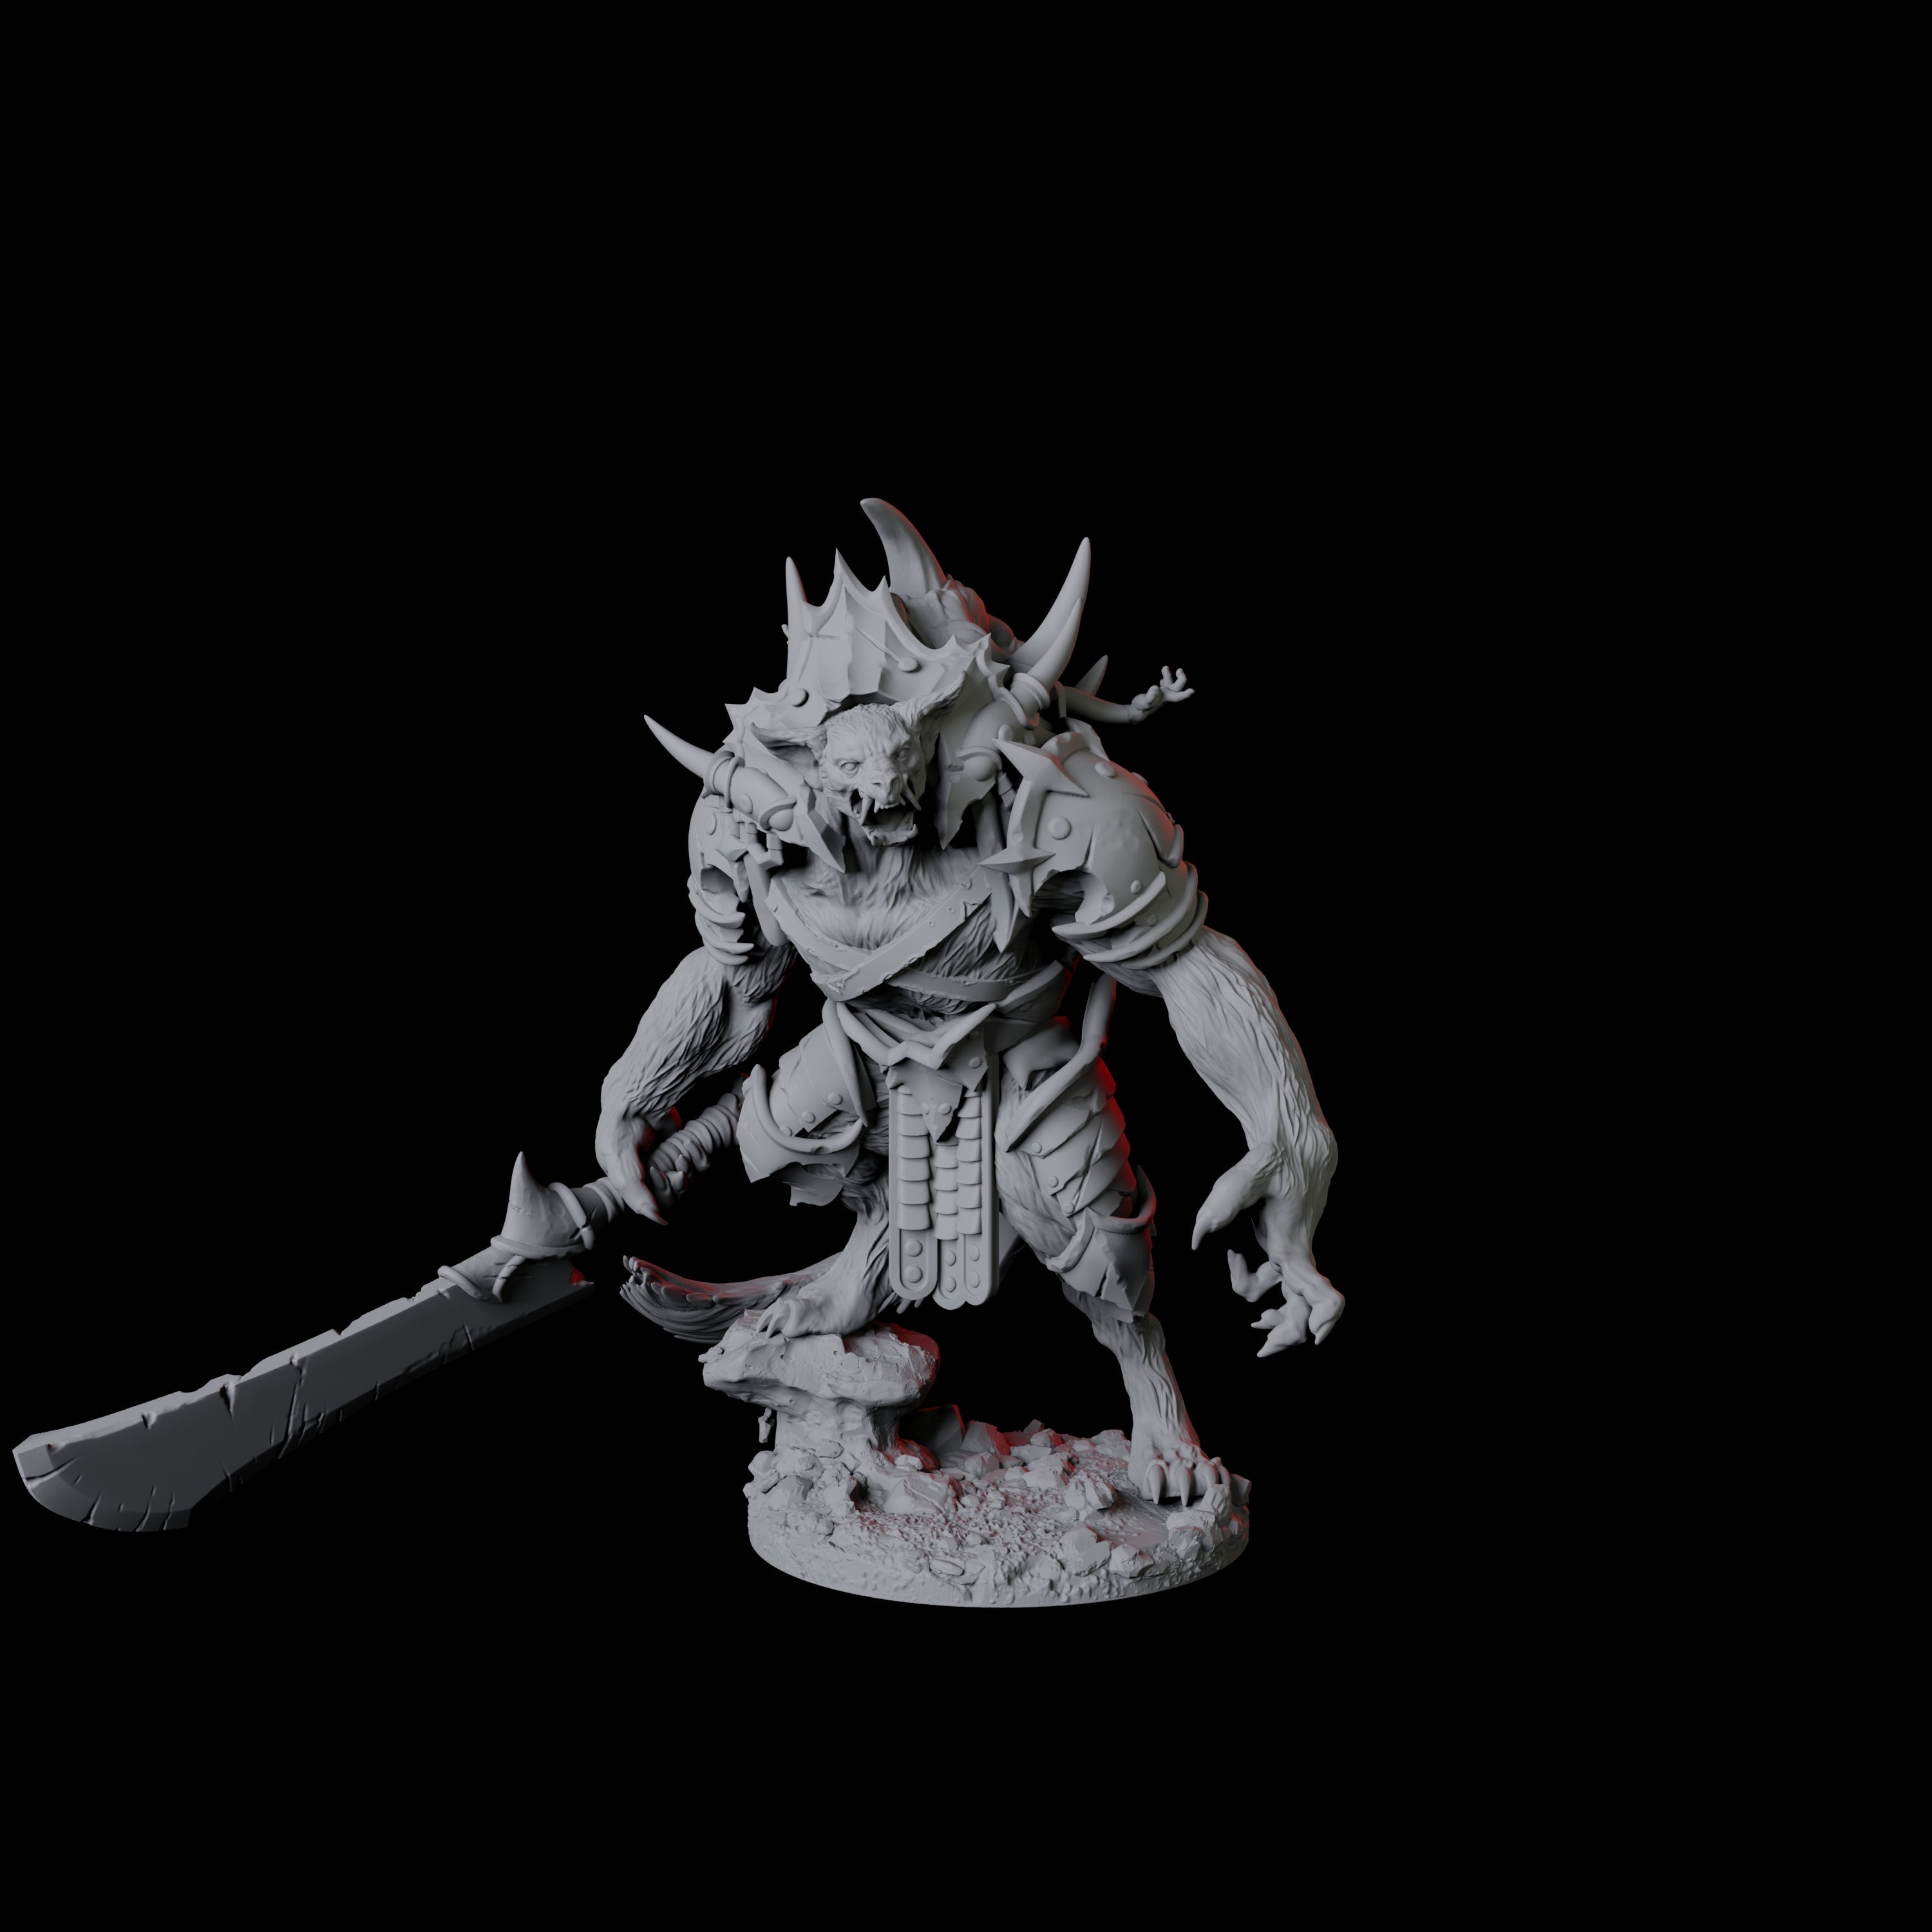 Gnoll Claw Fighter B Miniature for Dungeons and Dragons, Pathfinder or other TTRPGs